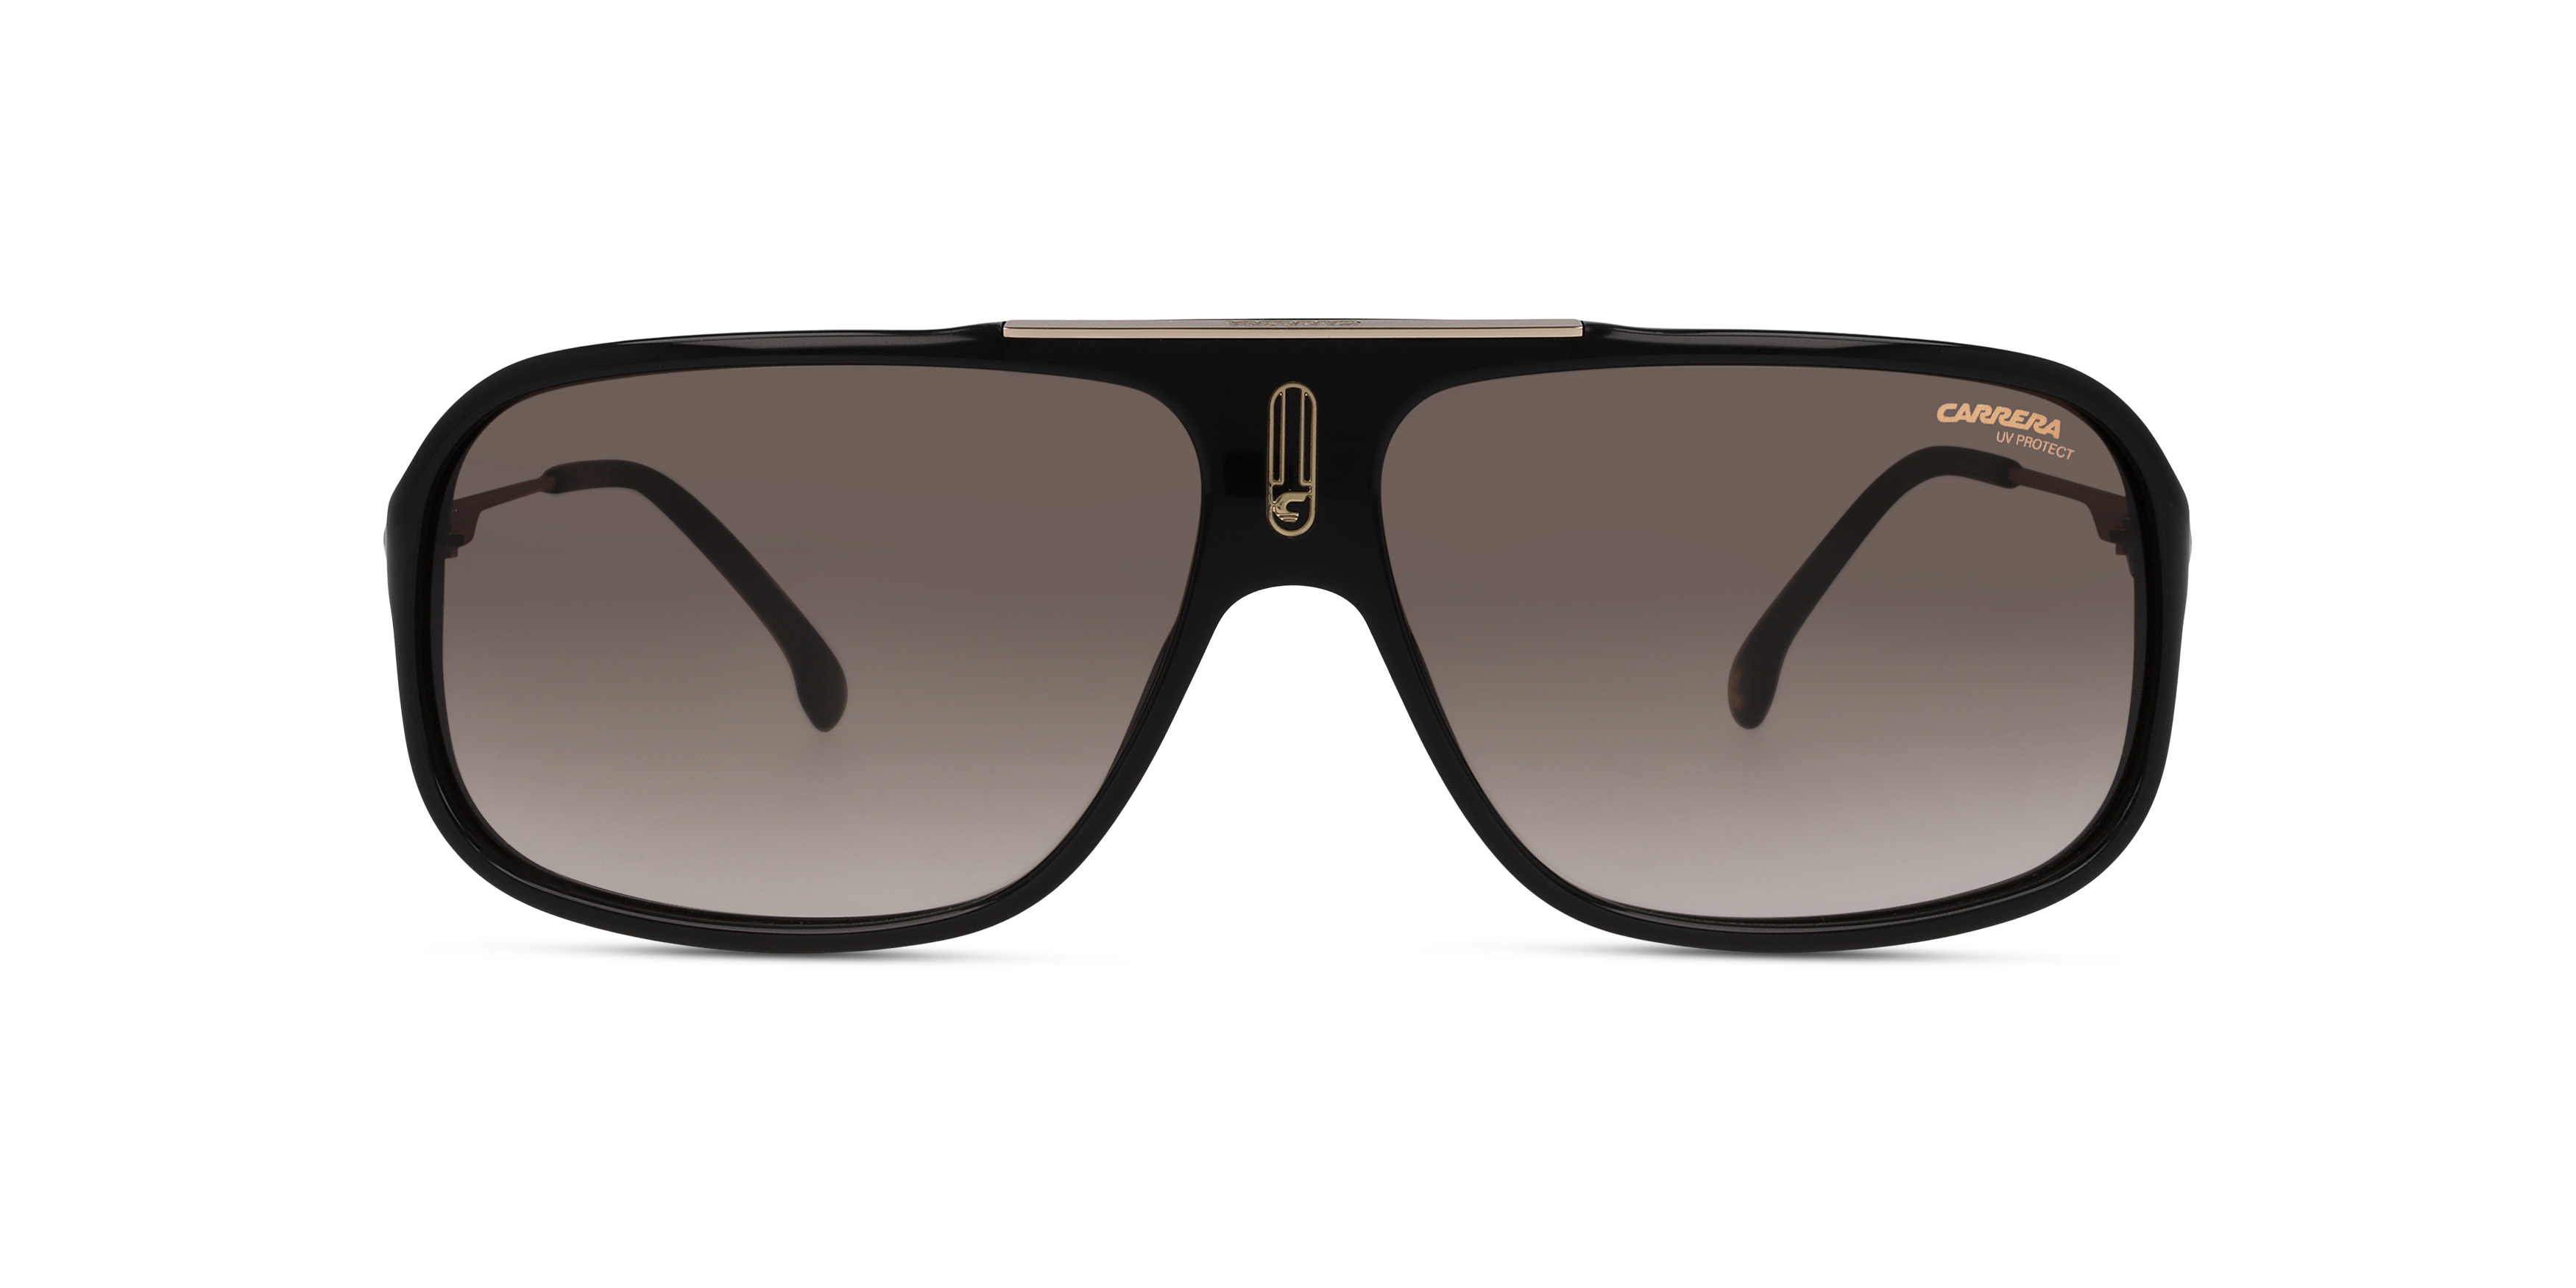 [products.image.front] CARRERA COOL65 807